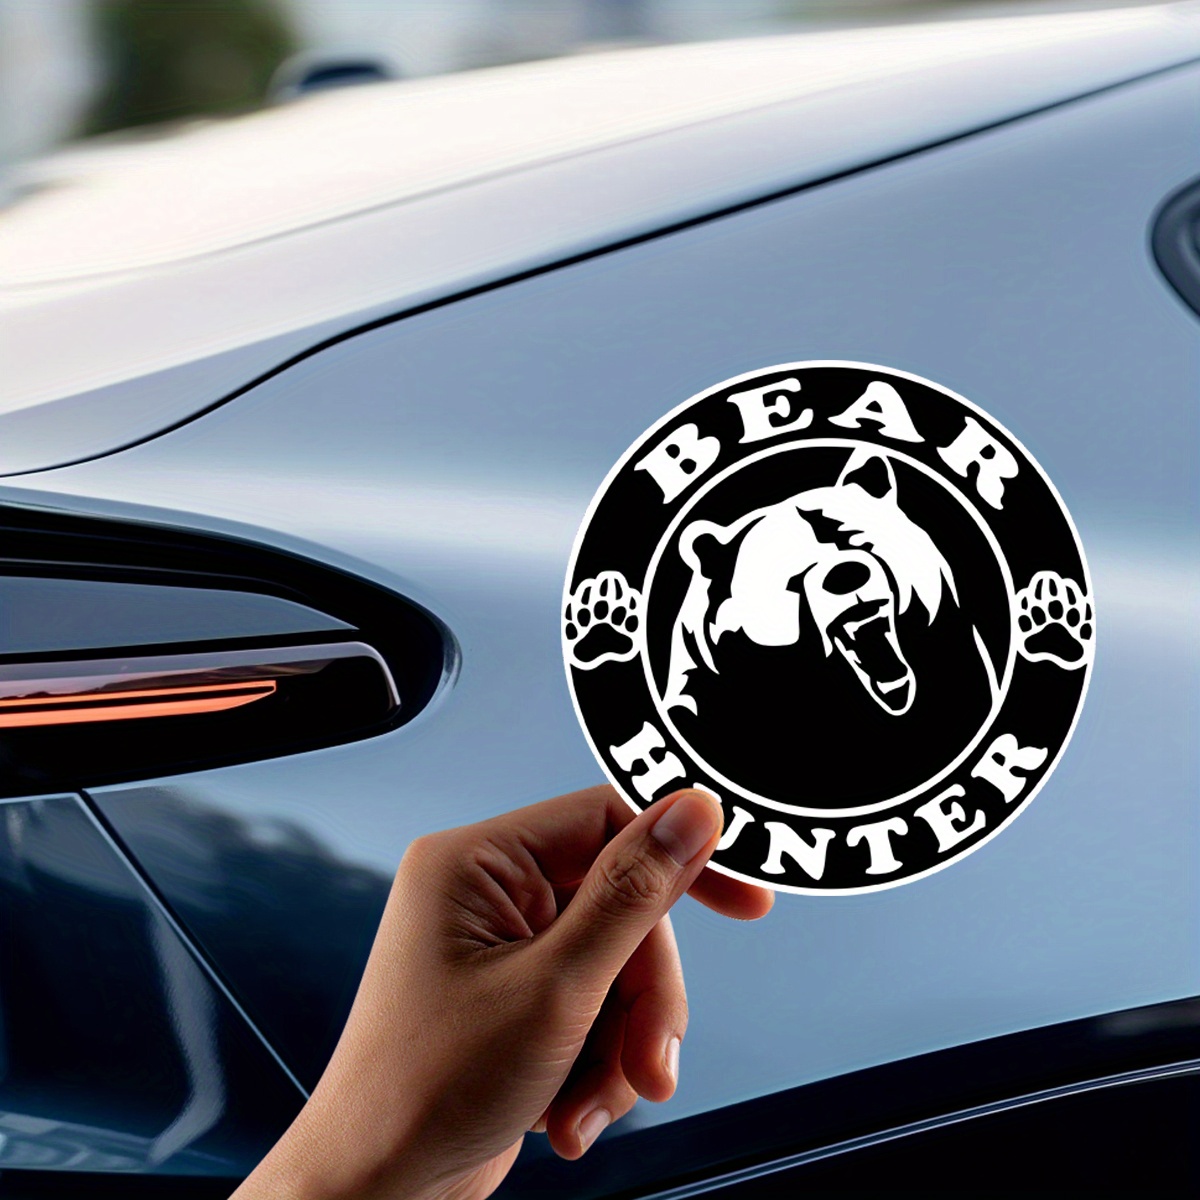 

Waterproof Vinyl Decal - Matte Finish, Durable Car Sticker With Claw Design For Outdoor Use